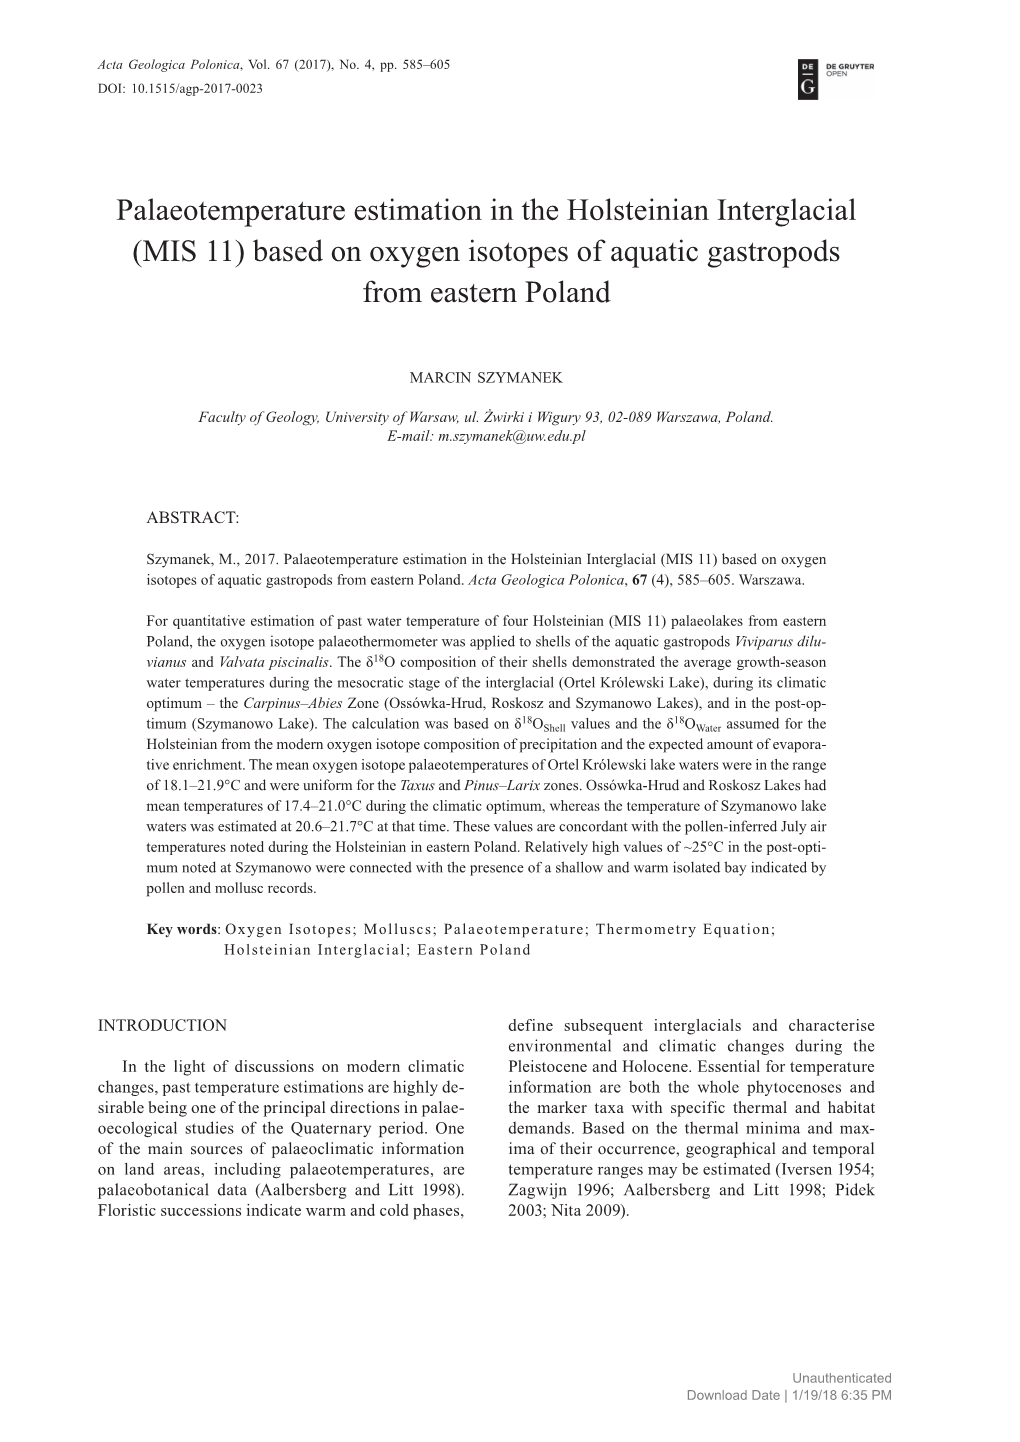 Palaeotemperature Estimation in the Holsteinian Interglacial (MIS 11) Based on Oxygen Isotopes of Aquatic Gastropods from Eastern Poland